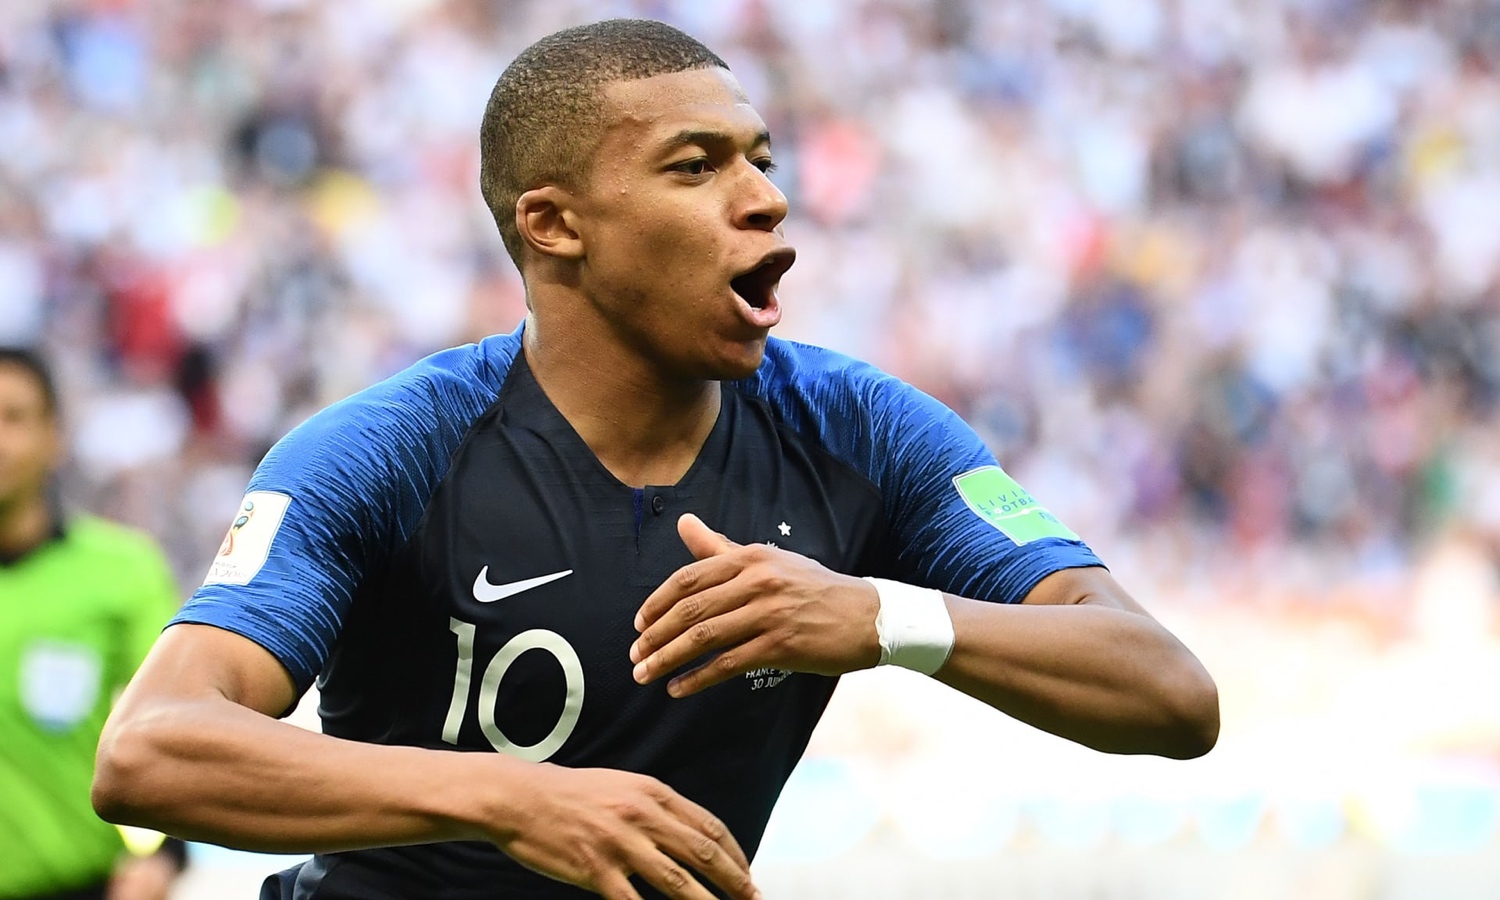 Kylian Mbappé, celebrating after scoring in France’s World Cup win over Argentina, is due to join PSG for £166m after spending last season on loan from Monaco. Photograph: Franck Fife/AFP/Getty Images